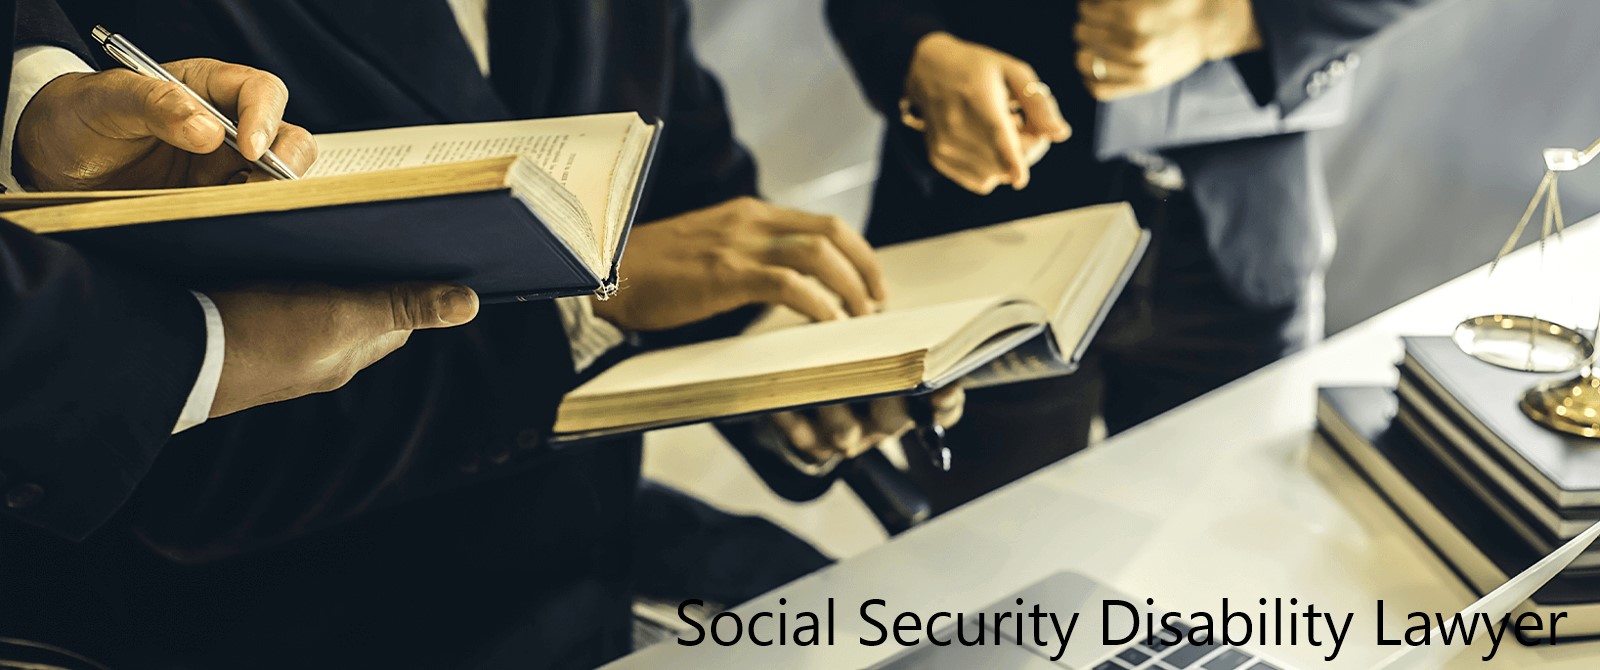 The Social Security Disability Lawyer